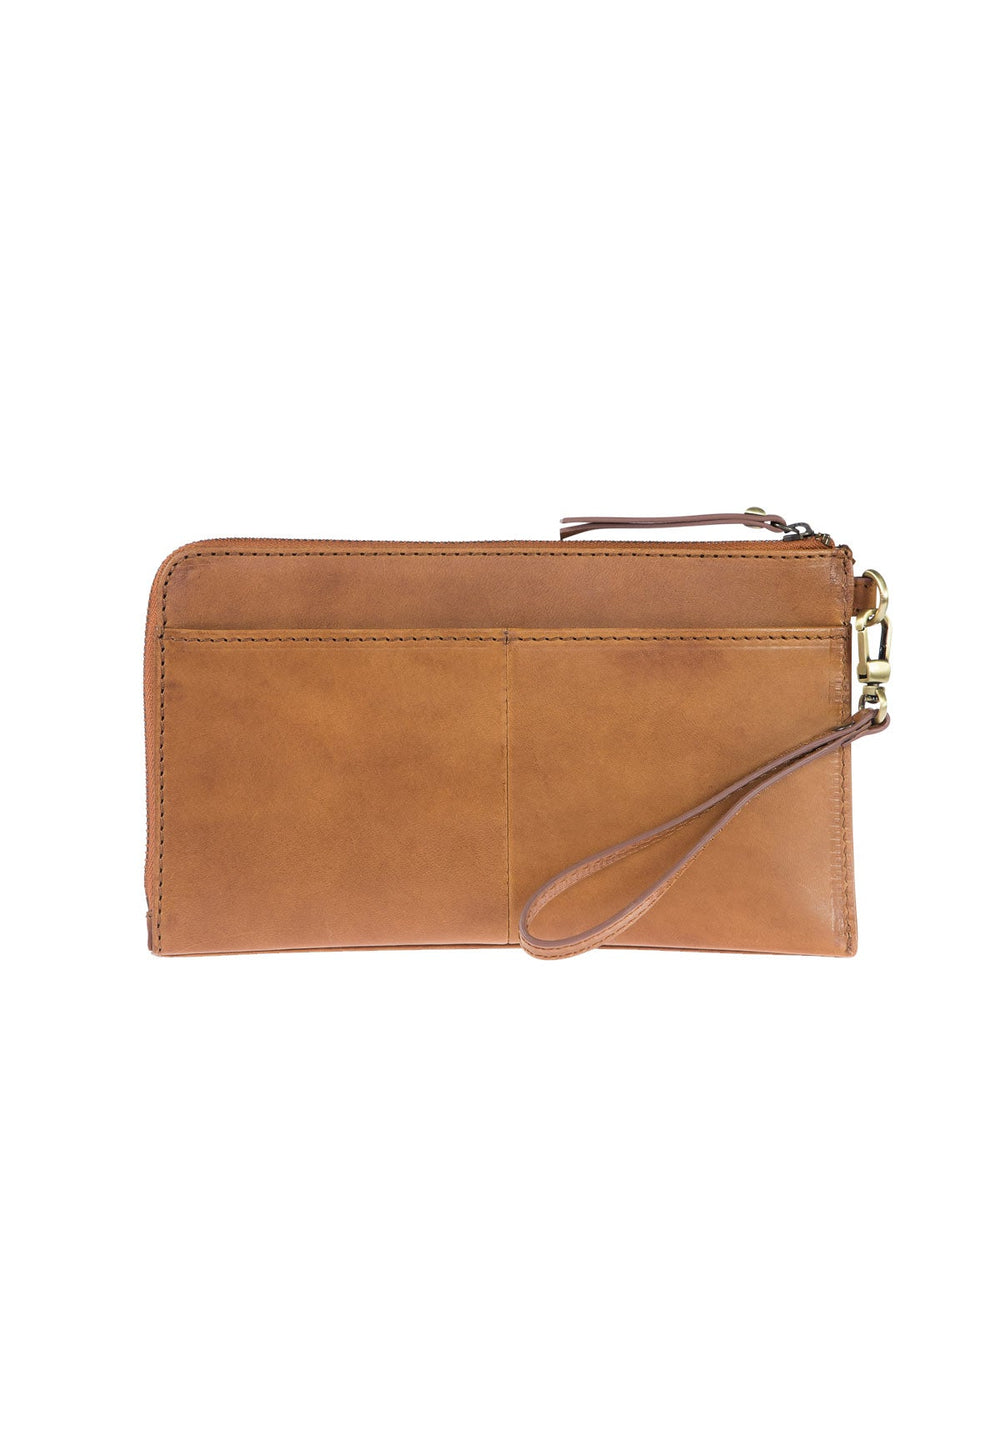 TRAVEL POUCH COGNAC CLASSIC LEATHER - Moeon